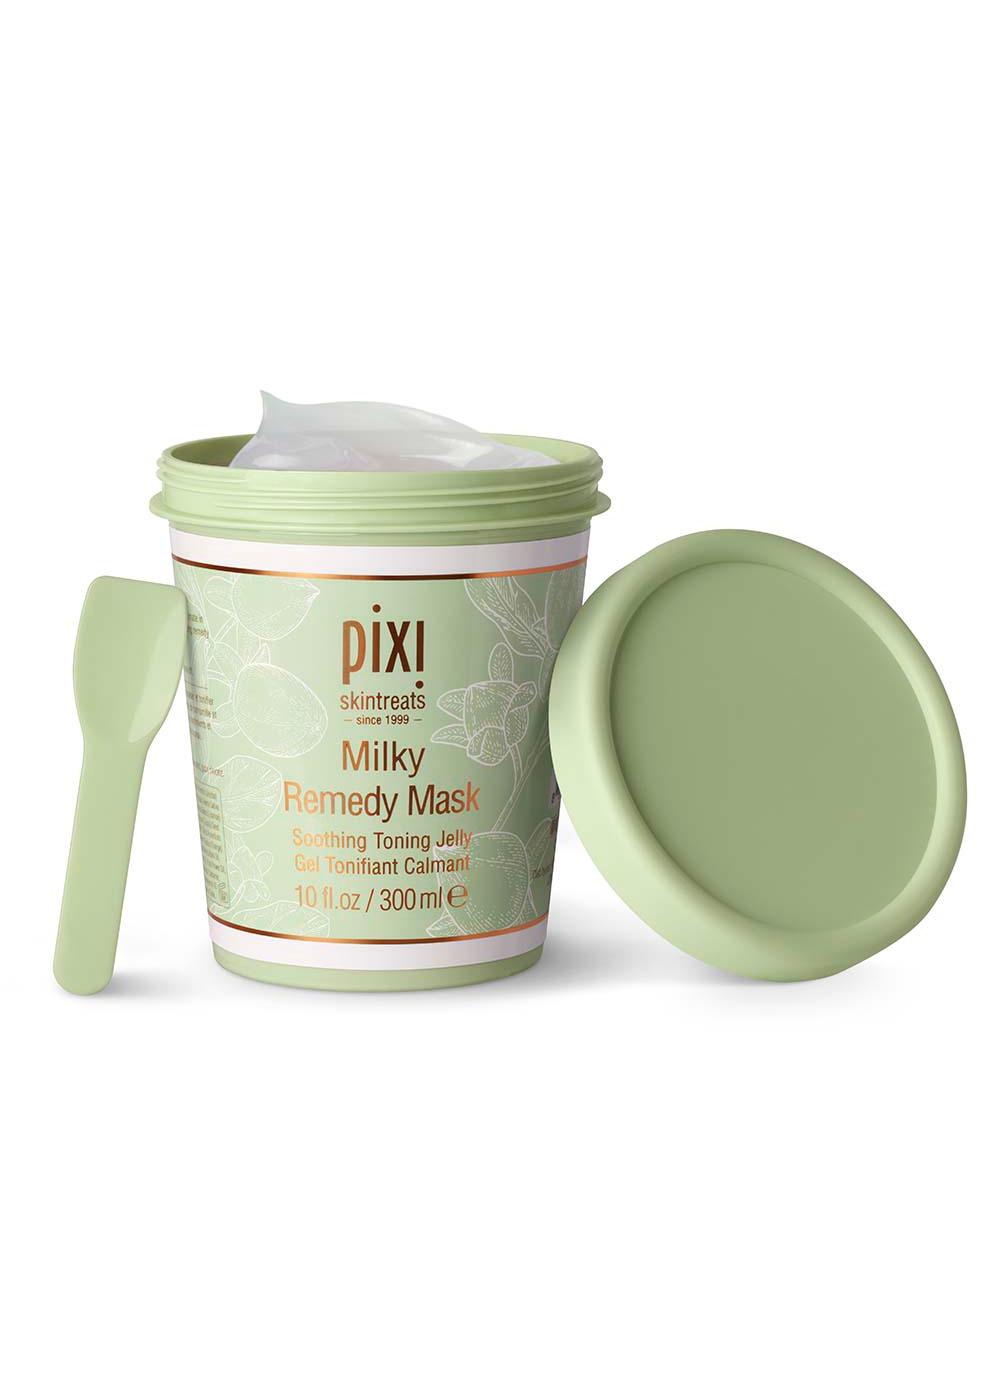 Pixi Milky Remedy Mask; image 2 of 2